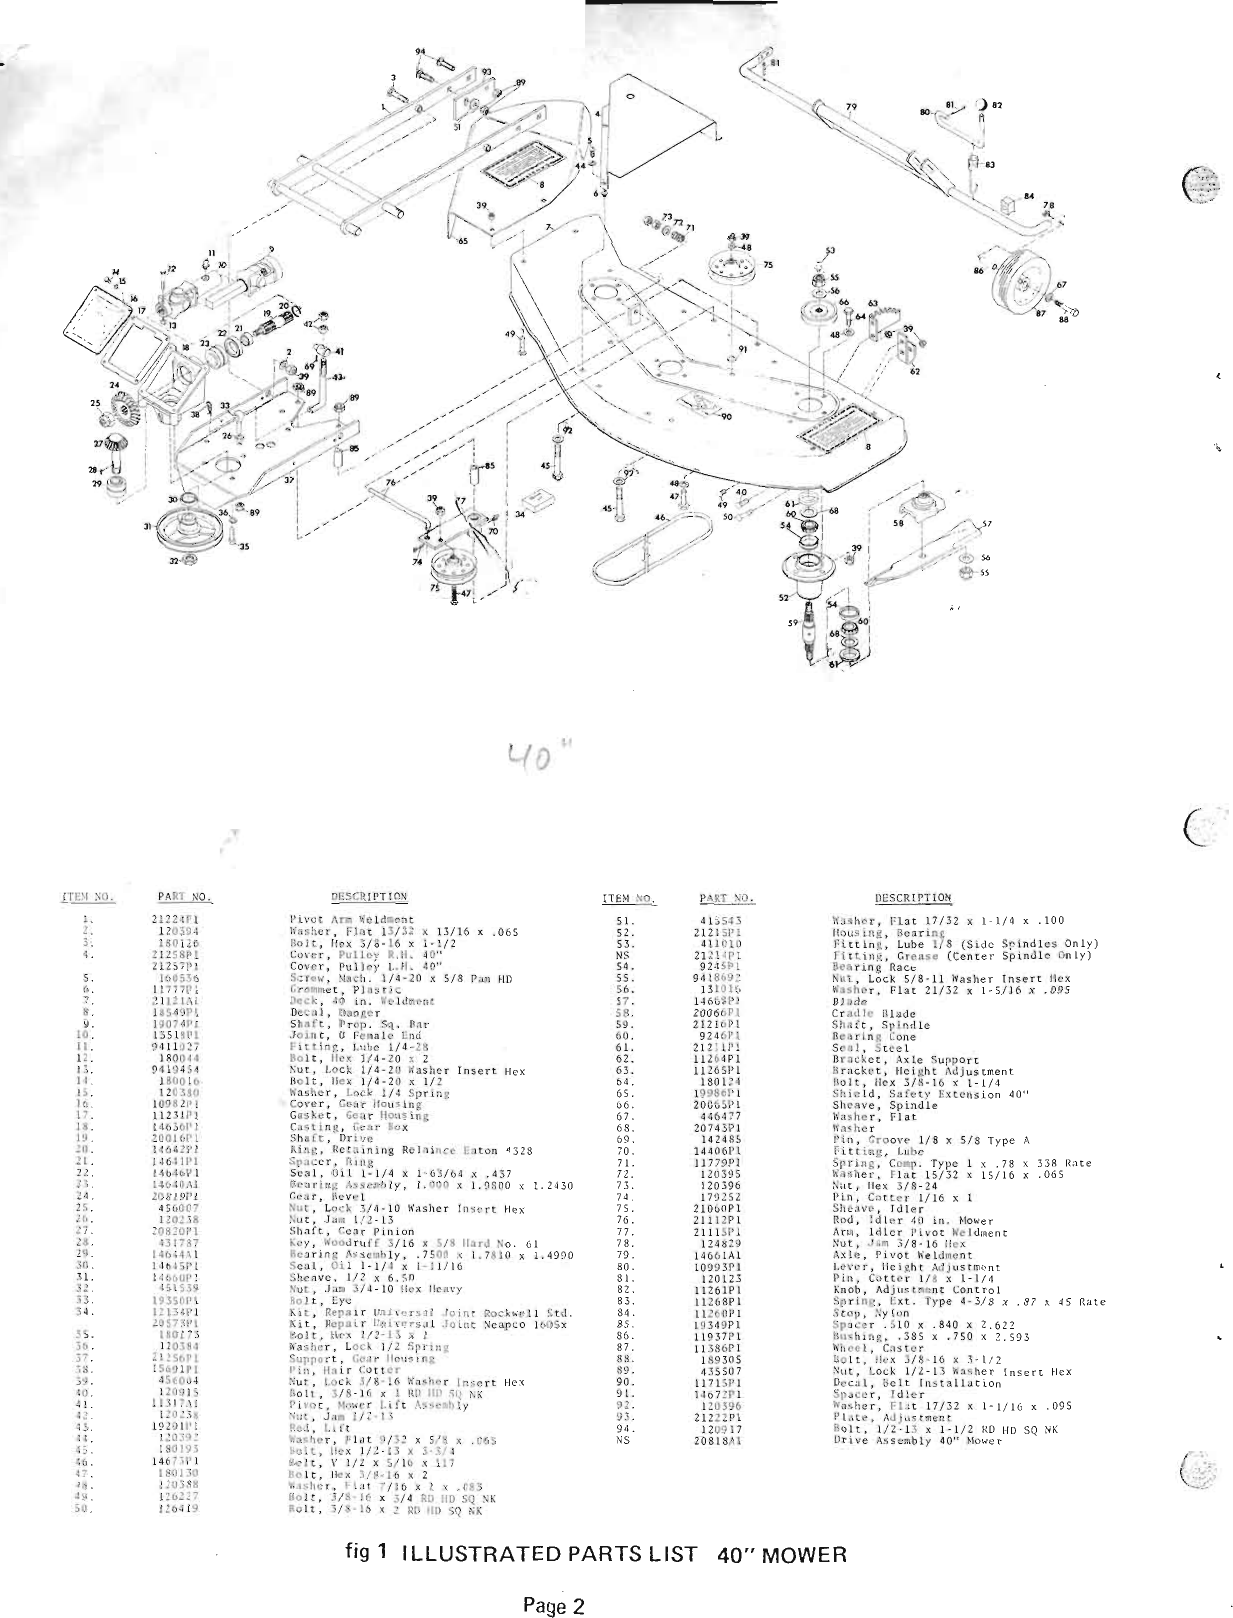 Page 2 of 9 - Gravely 21296-40 User Manual  To The 9c1fbe99-a004-4c0d-bb0f-adc5a923ed34